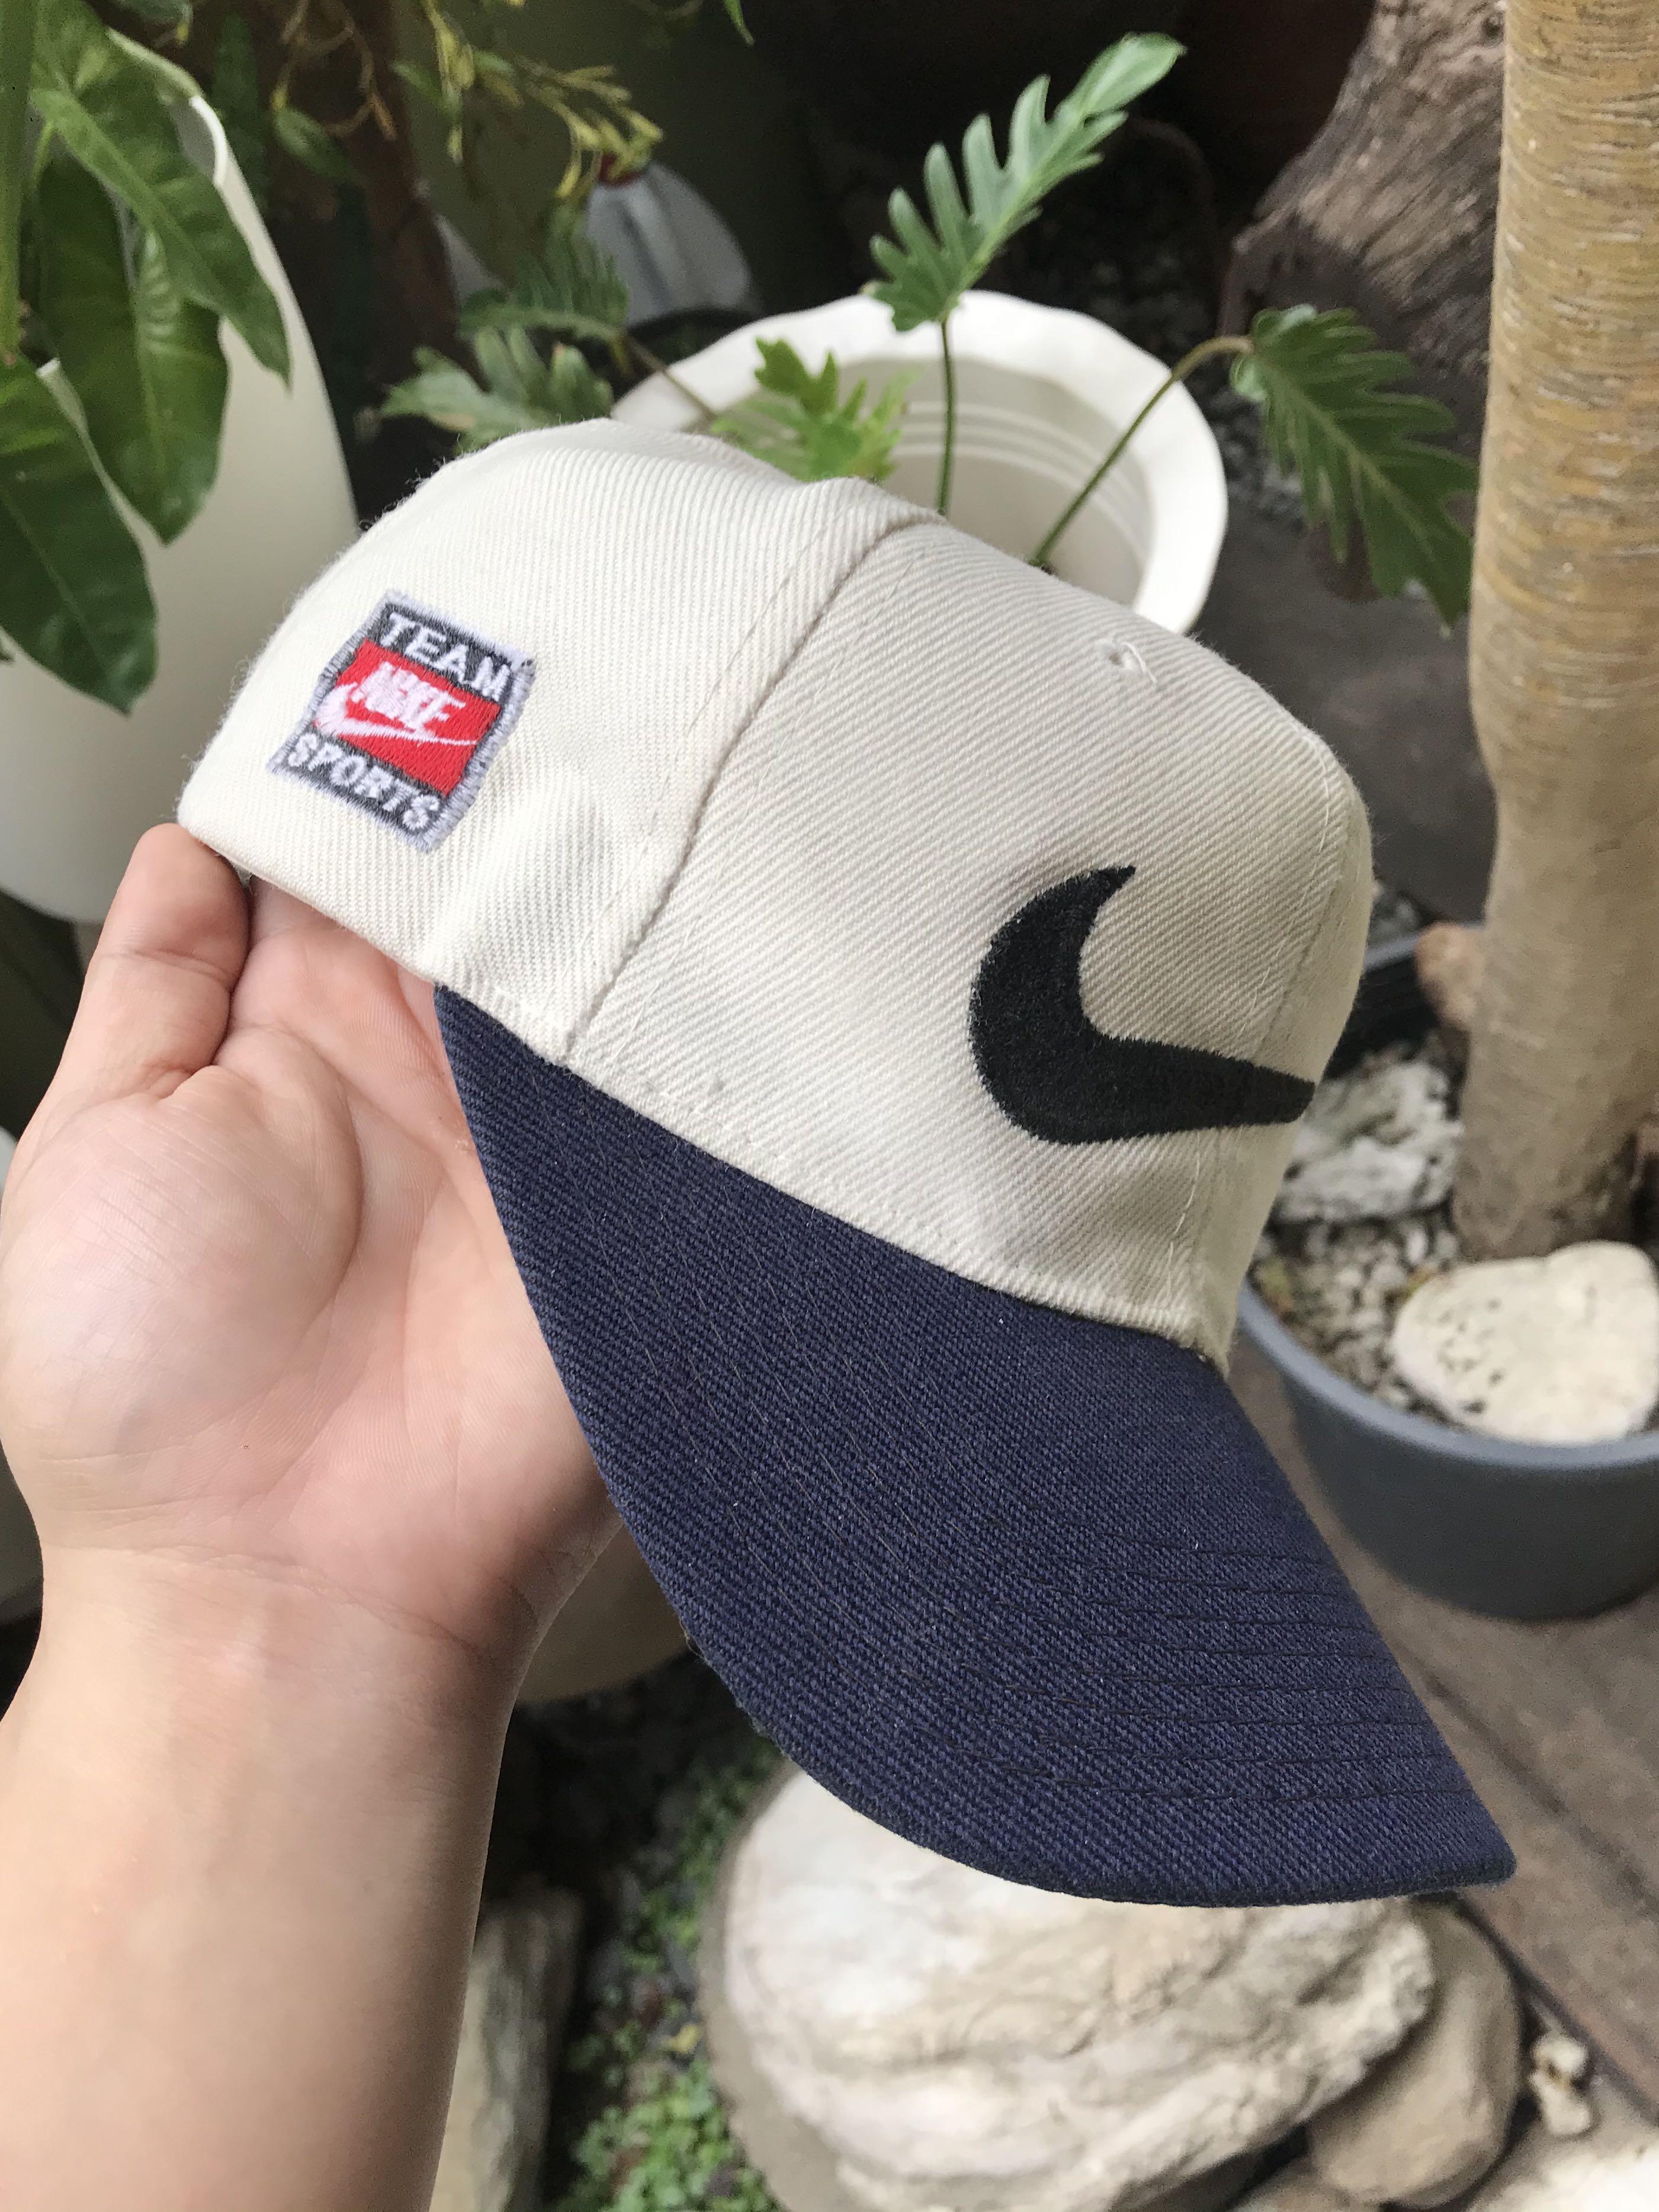 Nike vintage cap, Men's Watches & & Hats on Carousell